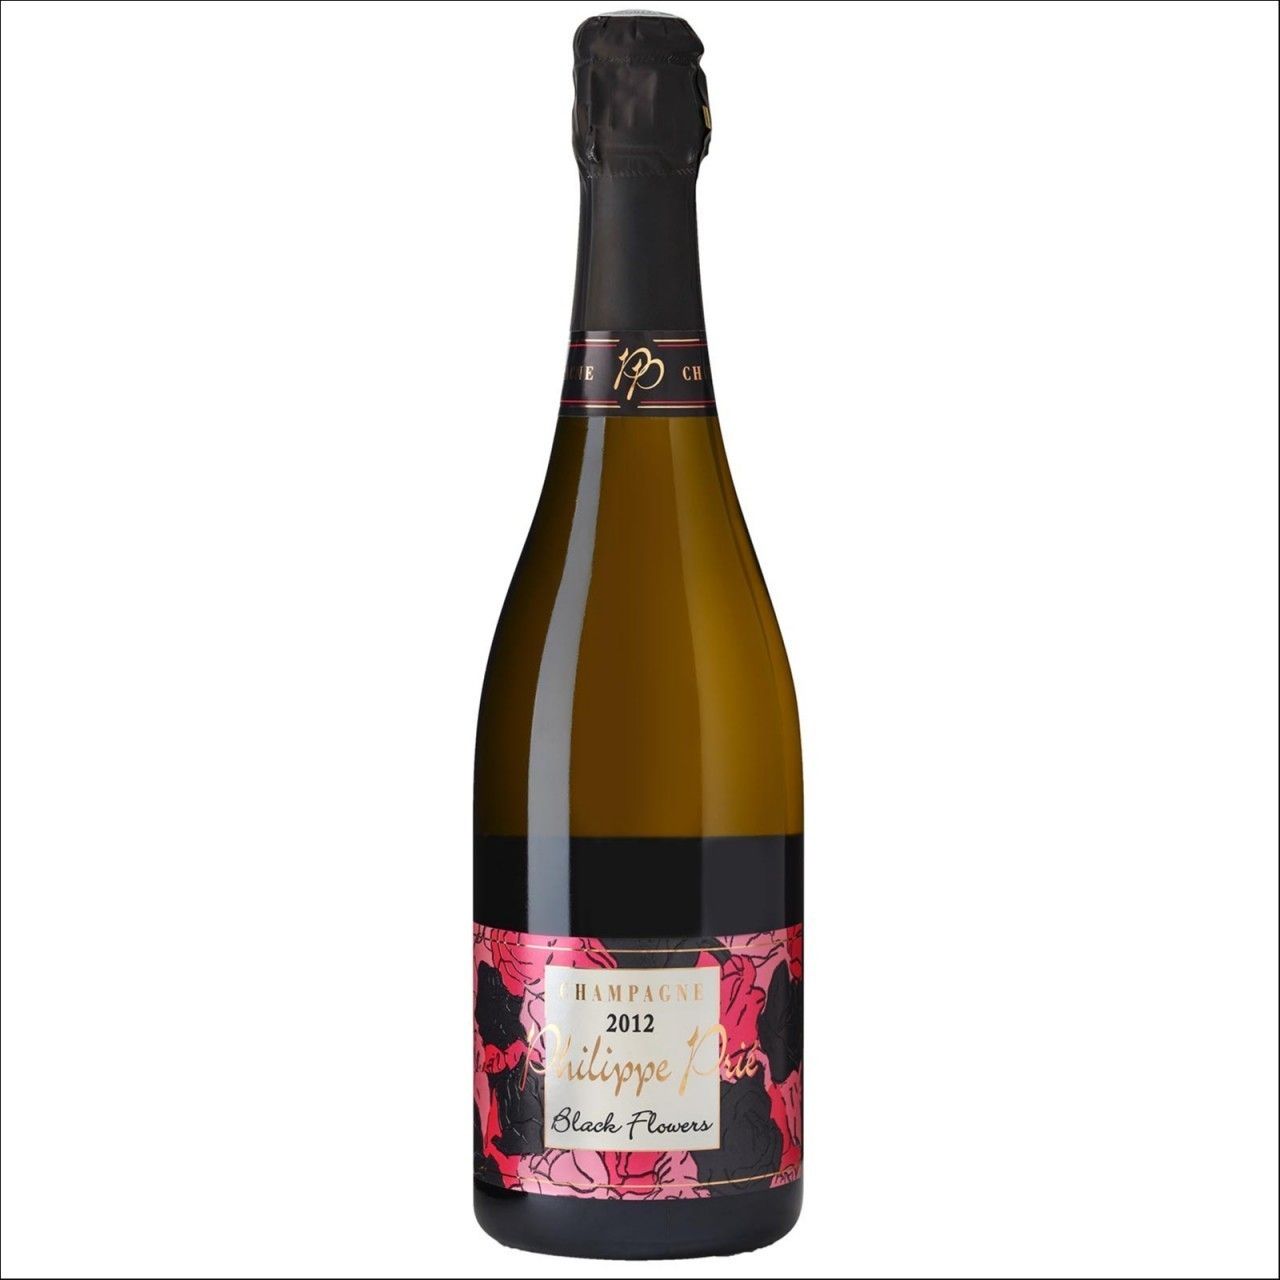 CHRYSOBULLE BY PRIE - CHAMPAGNE - Black Flowers Millésime 2012